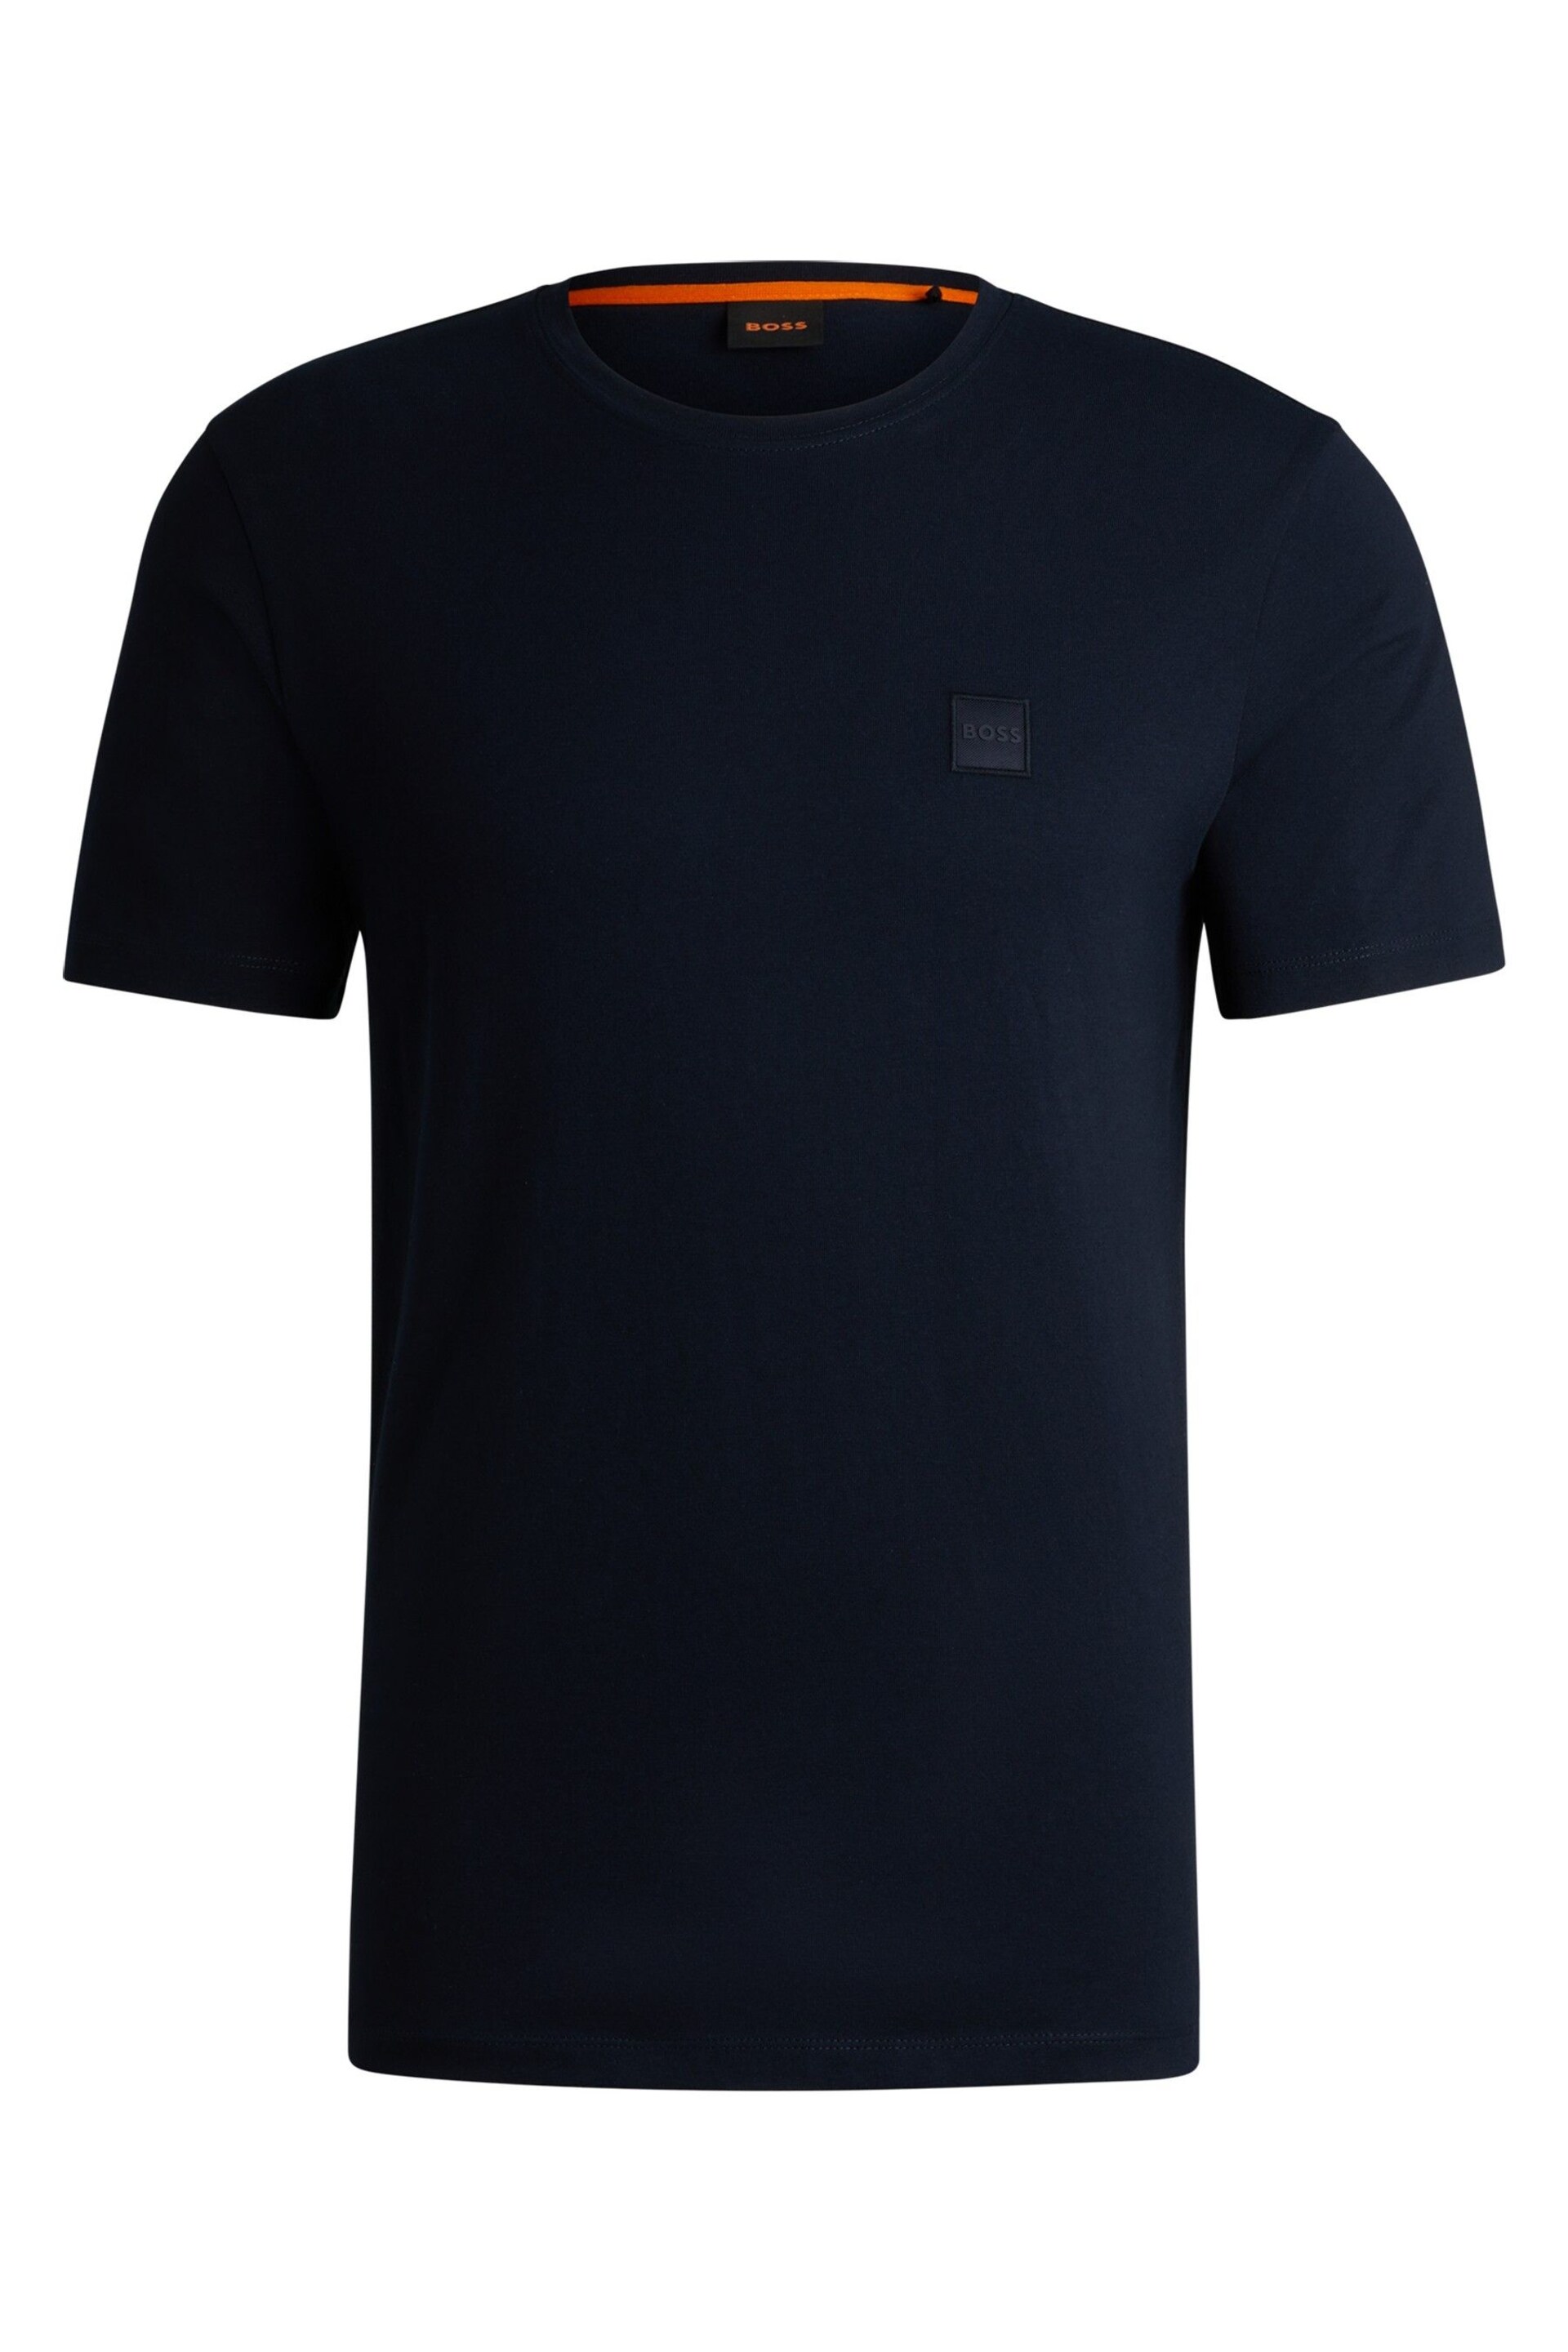 BOSS Dark Blue Relaxed Fit Box Logo T-Shirt - Image 5 of 5